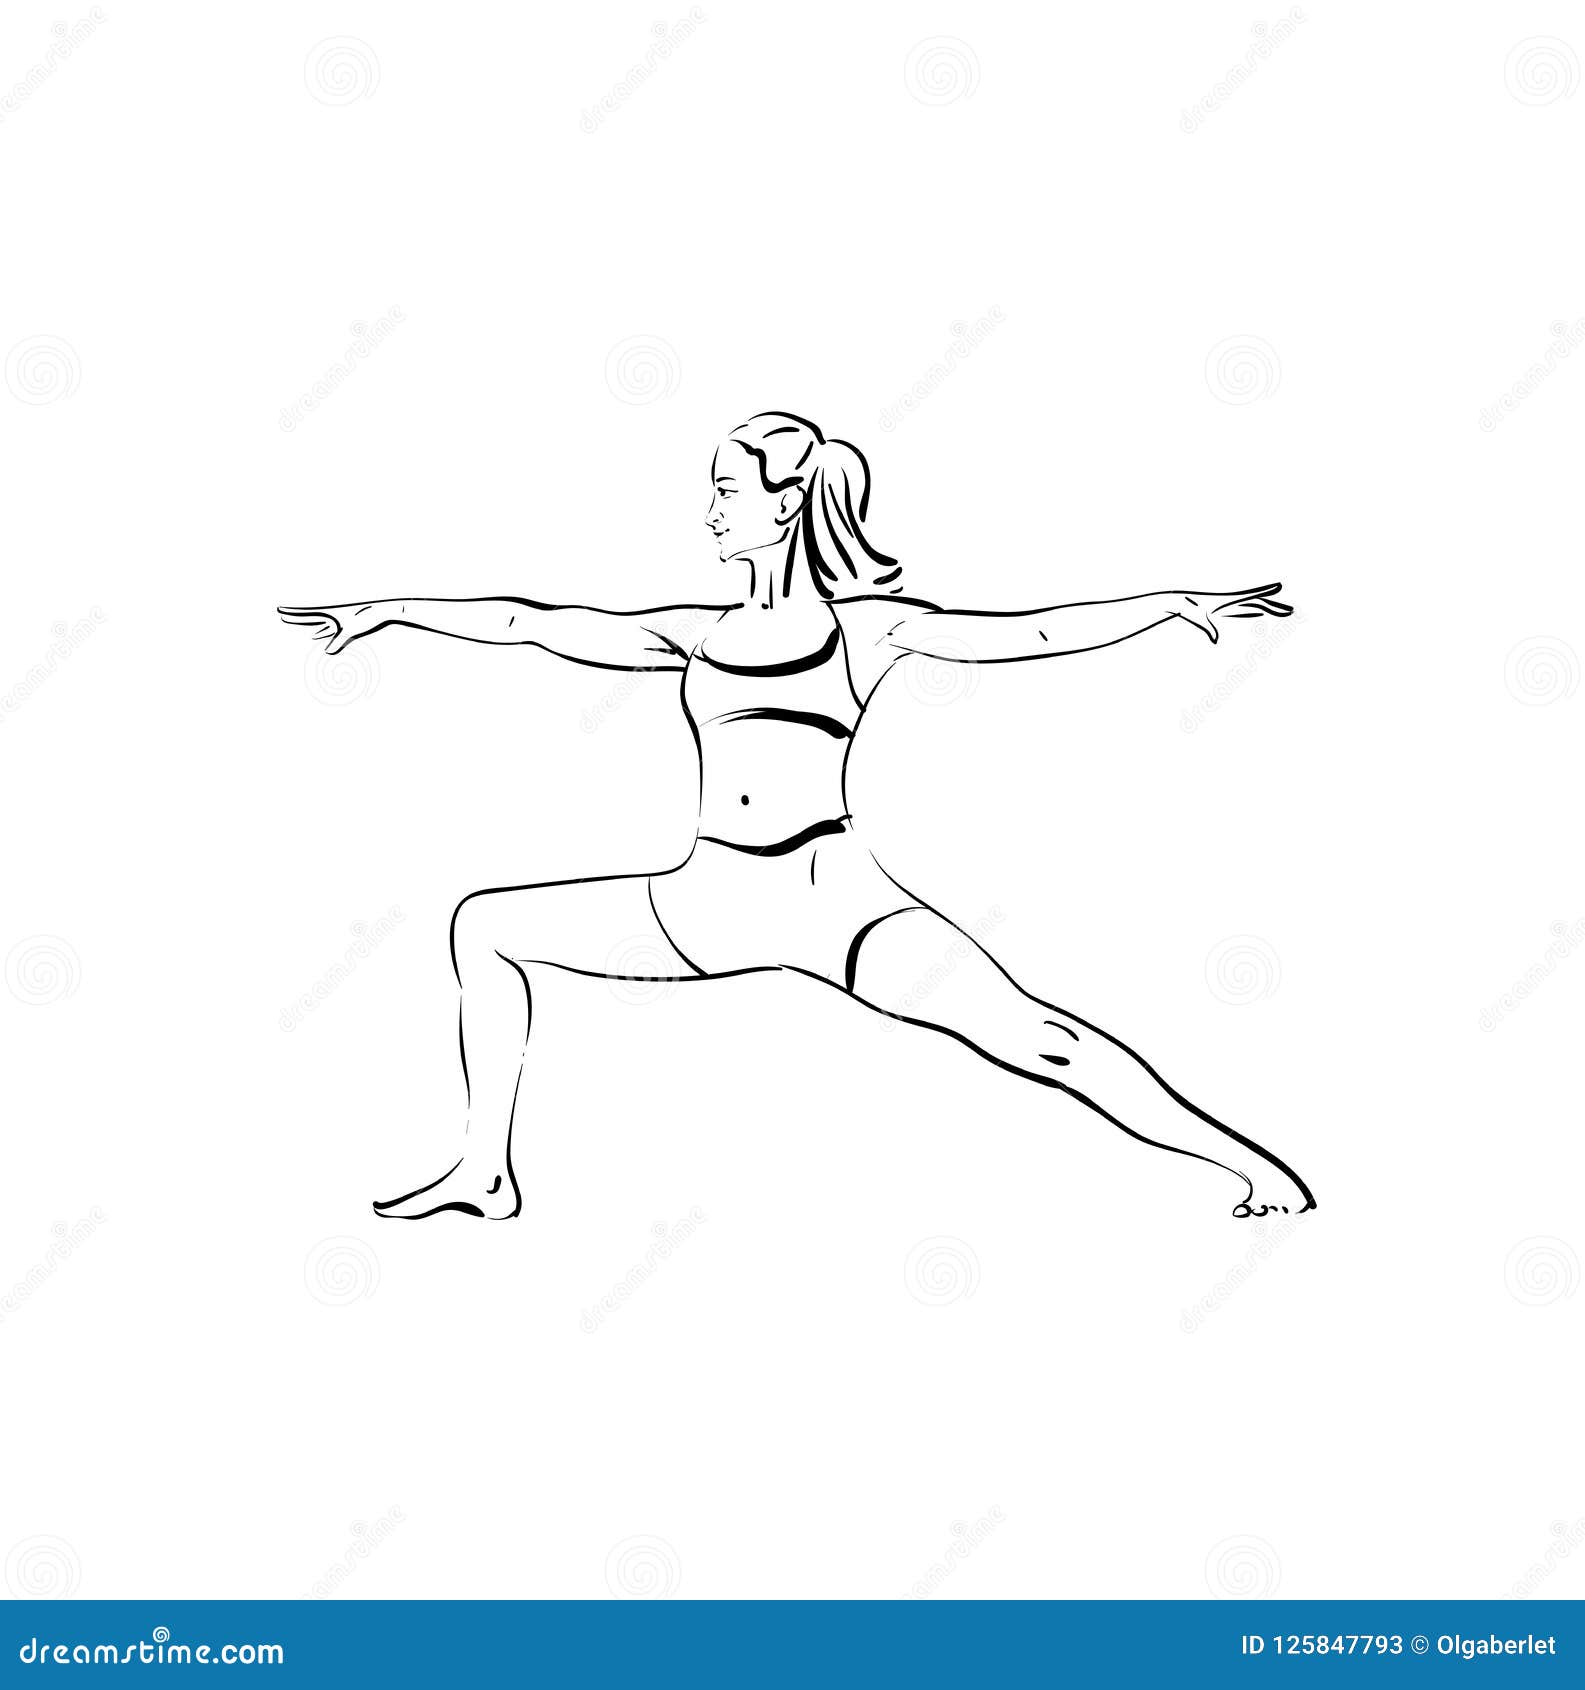 Beautiful Woman Doing Yoga Sketch, Black on White Stock Vector ...